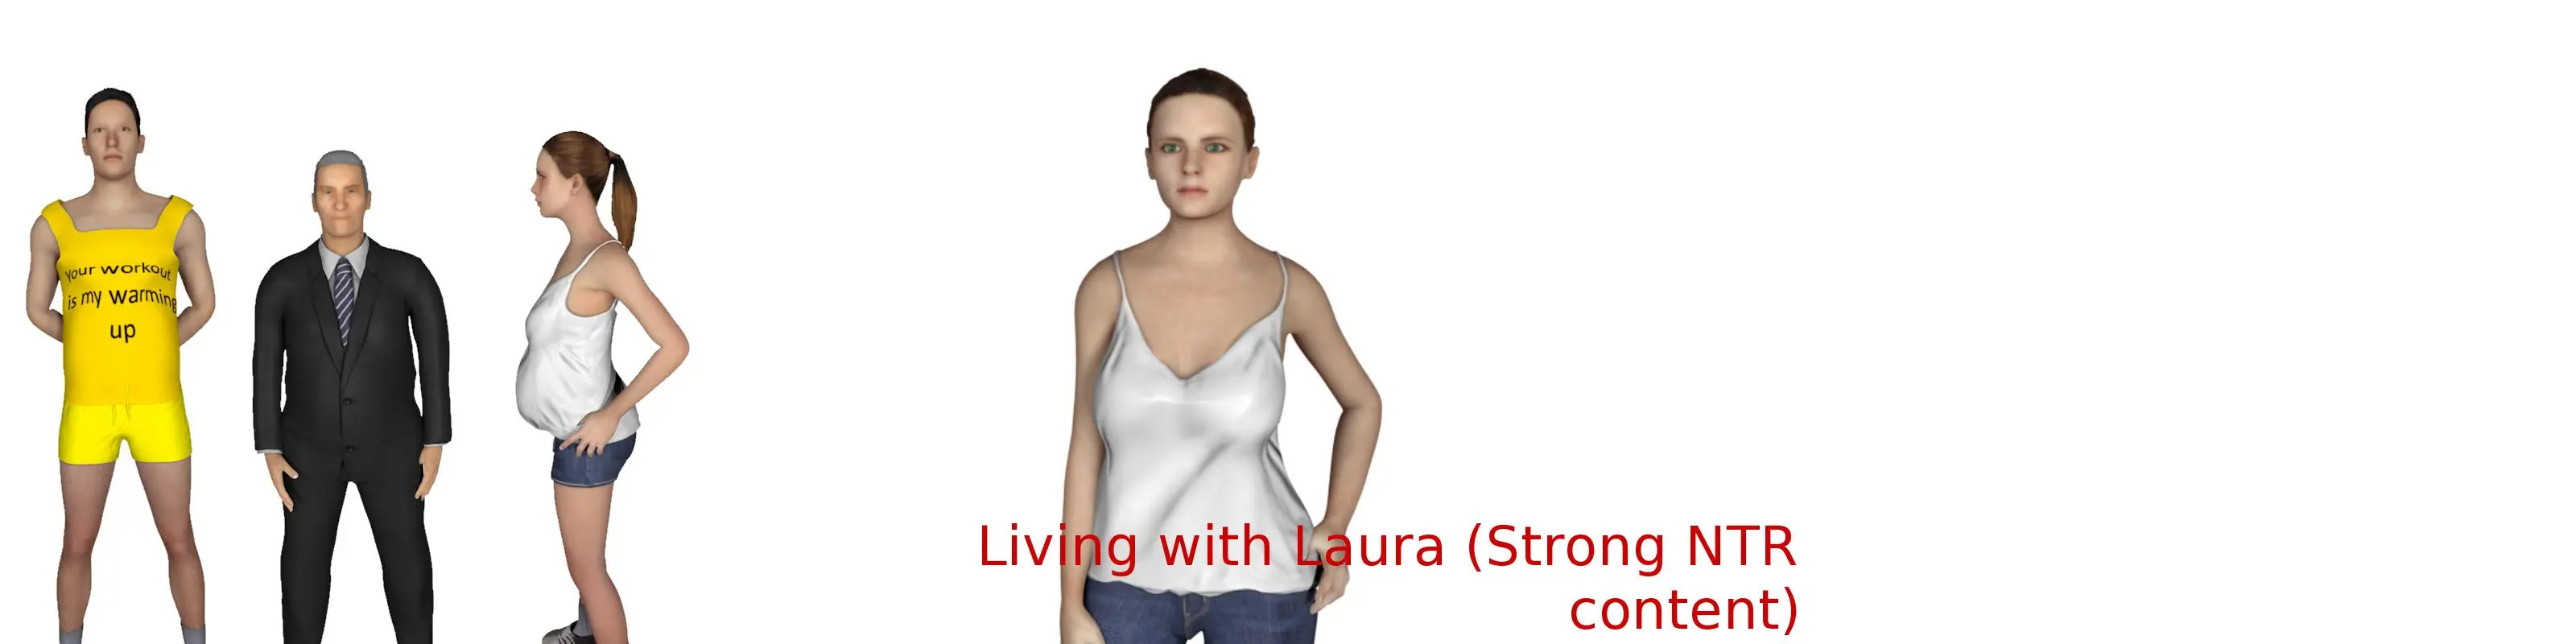 Living with Laura [v0.3] main image